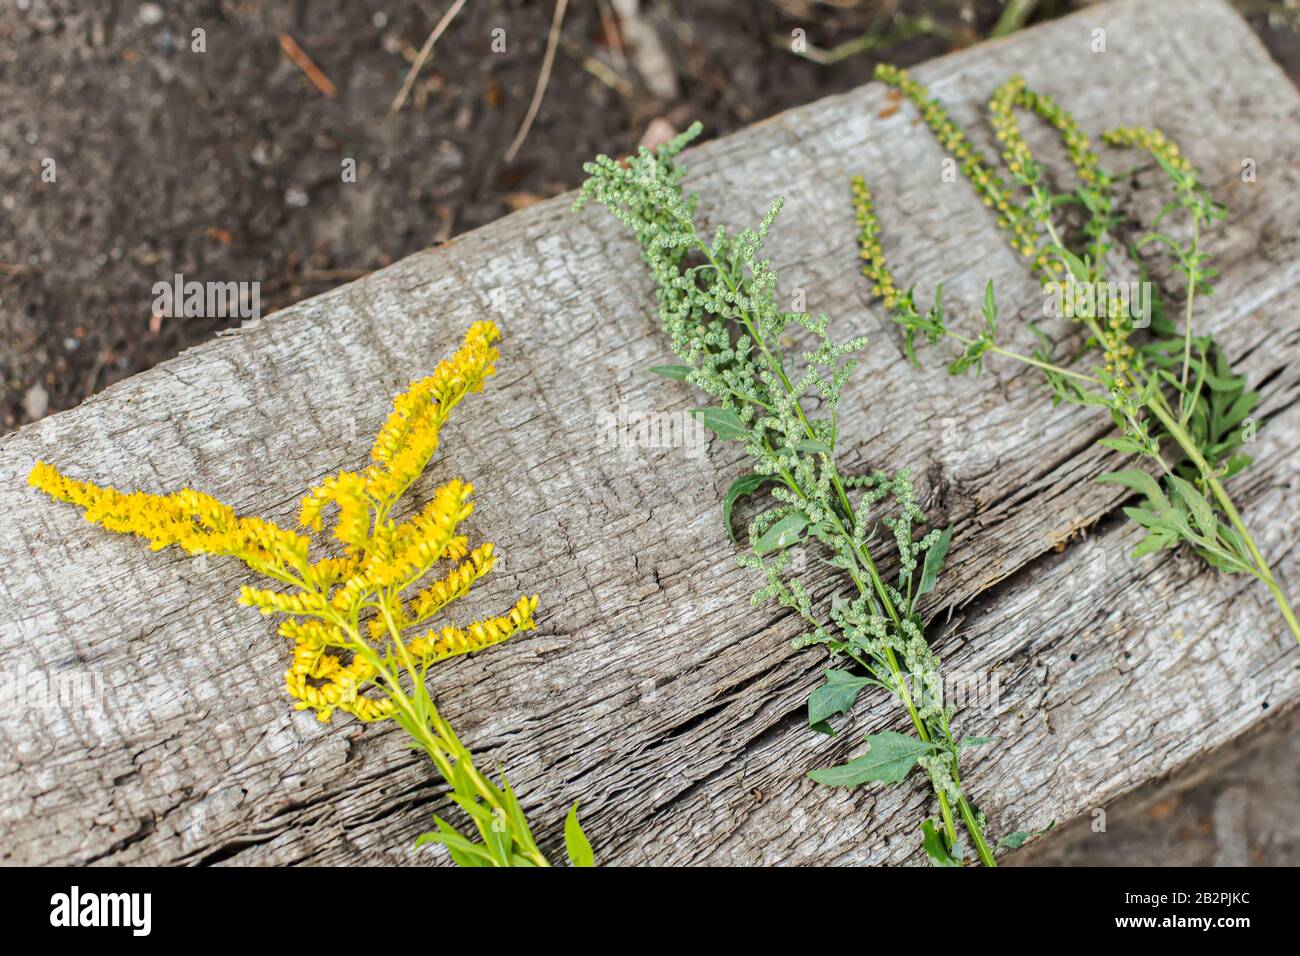 Comparison of Solidago, wormwood or Artemisia absinthium and Ambrosia flowering in summer. Soft focus. Collected medicinal plants on a concrete slab. Stock Photo